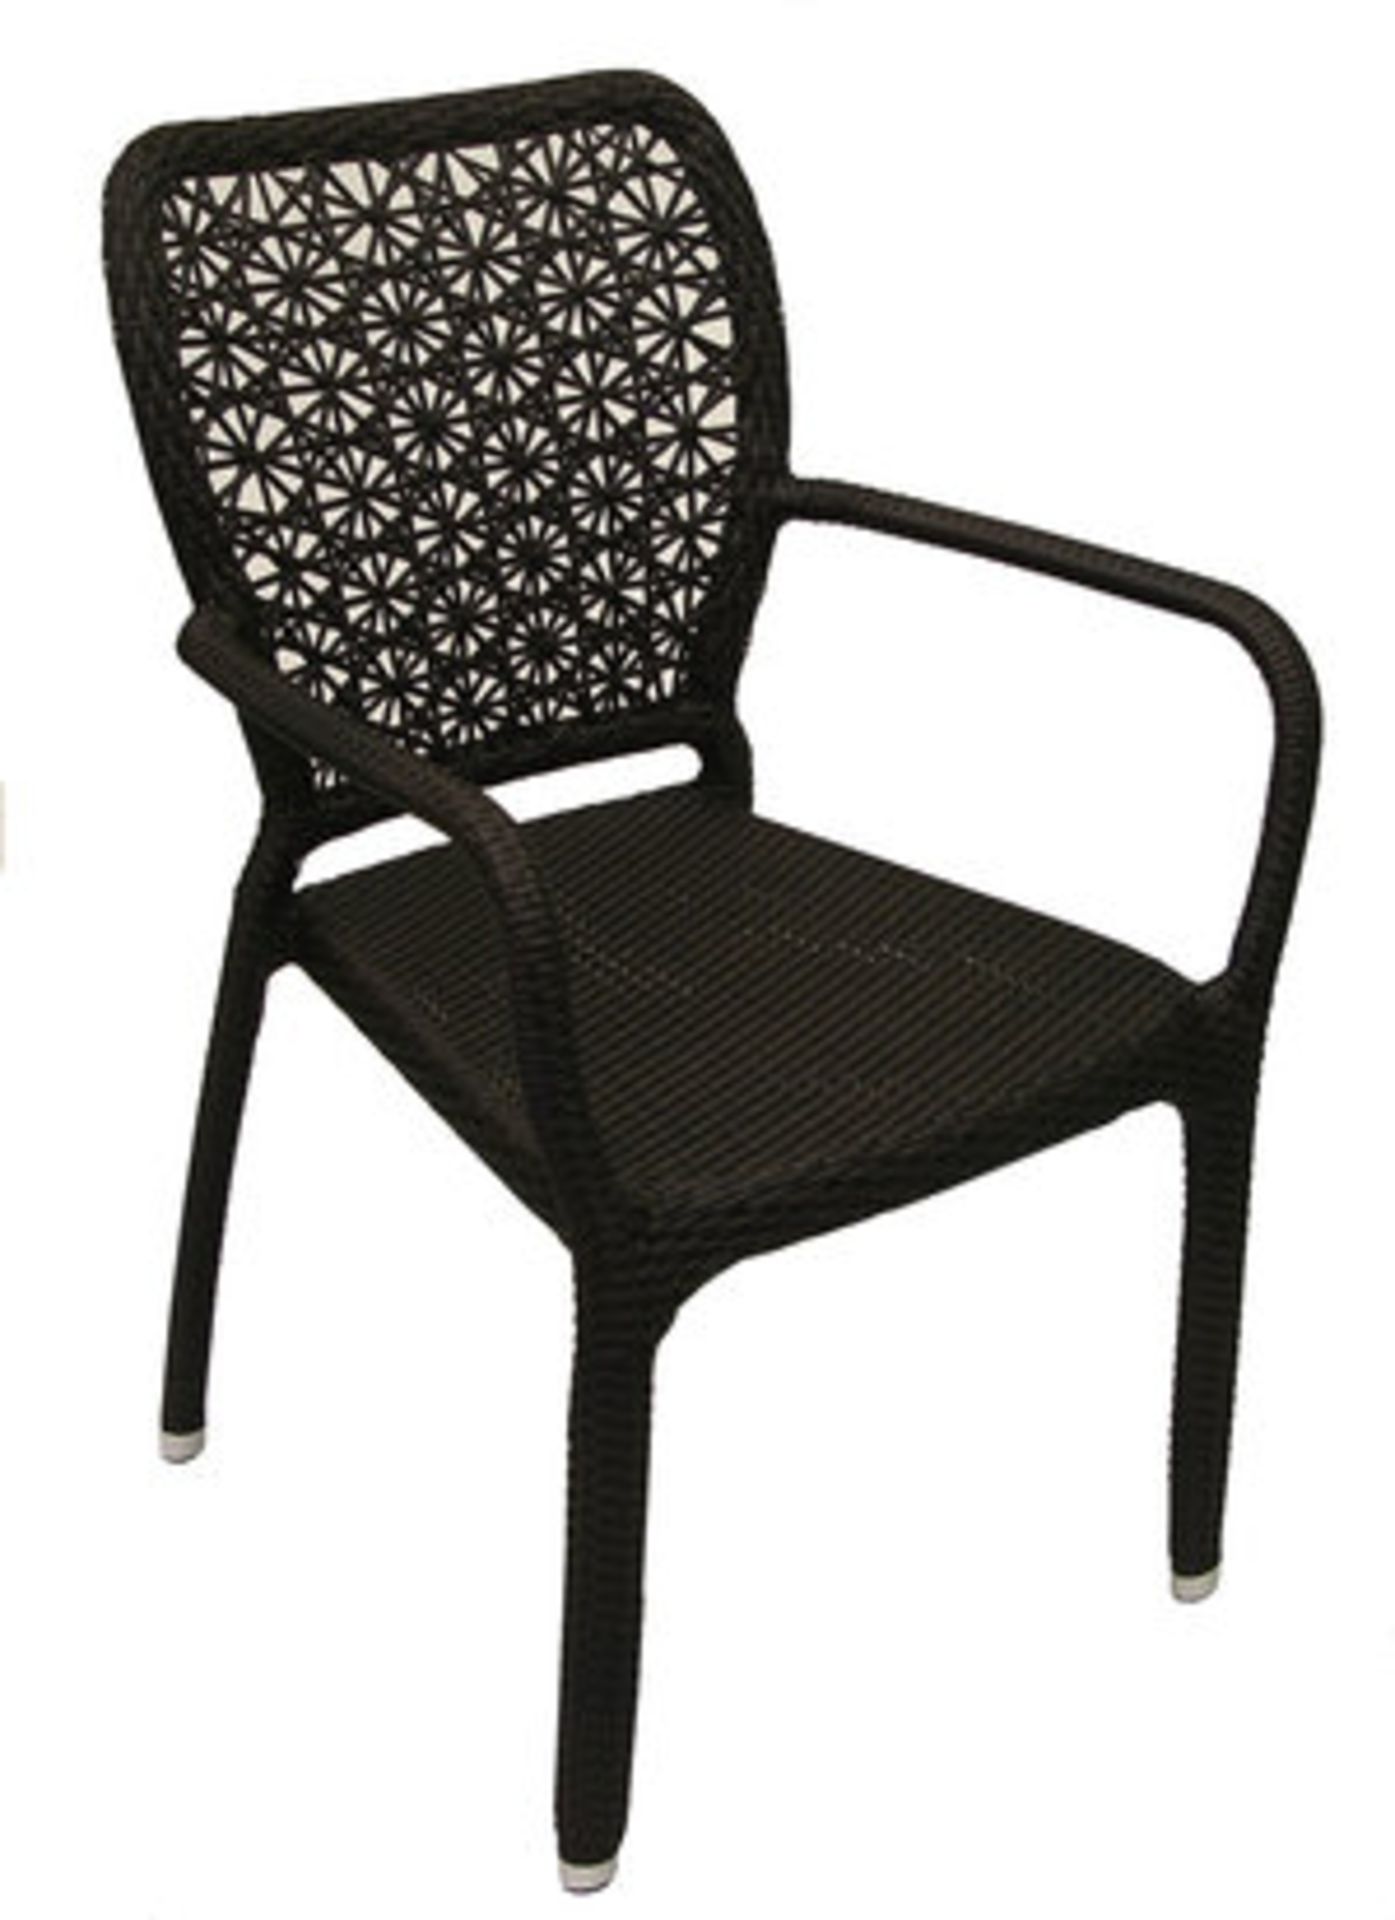 Jessie Arm Chair - expresso, C09 JES AC EXP CH star weave back, 20 total